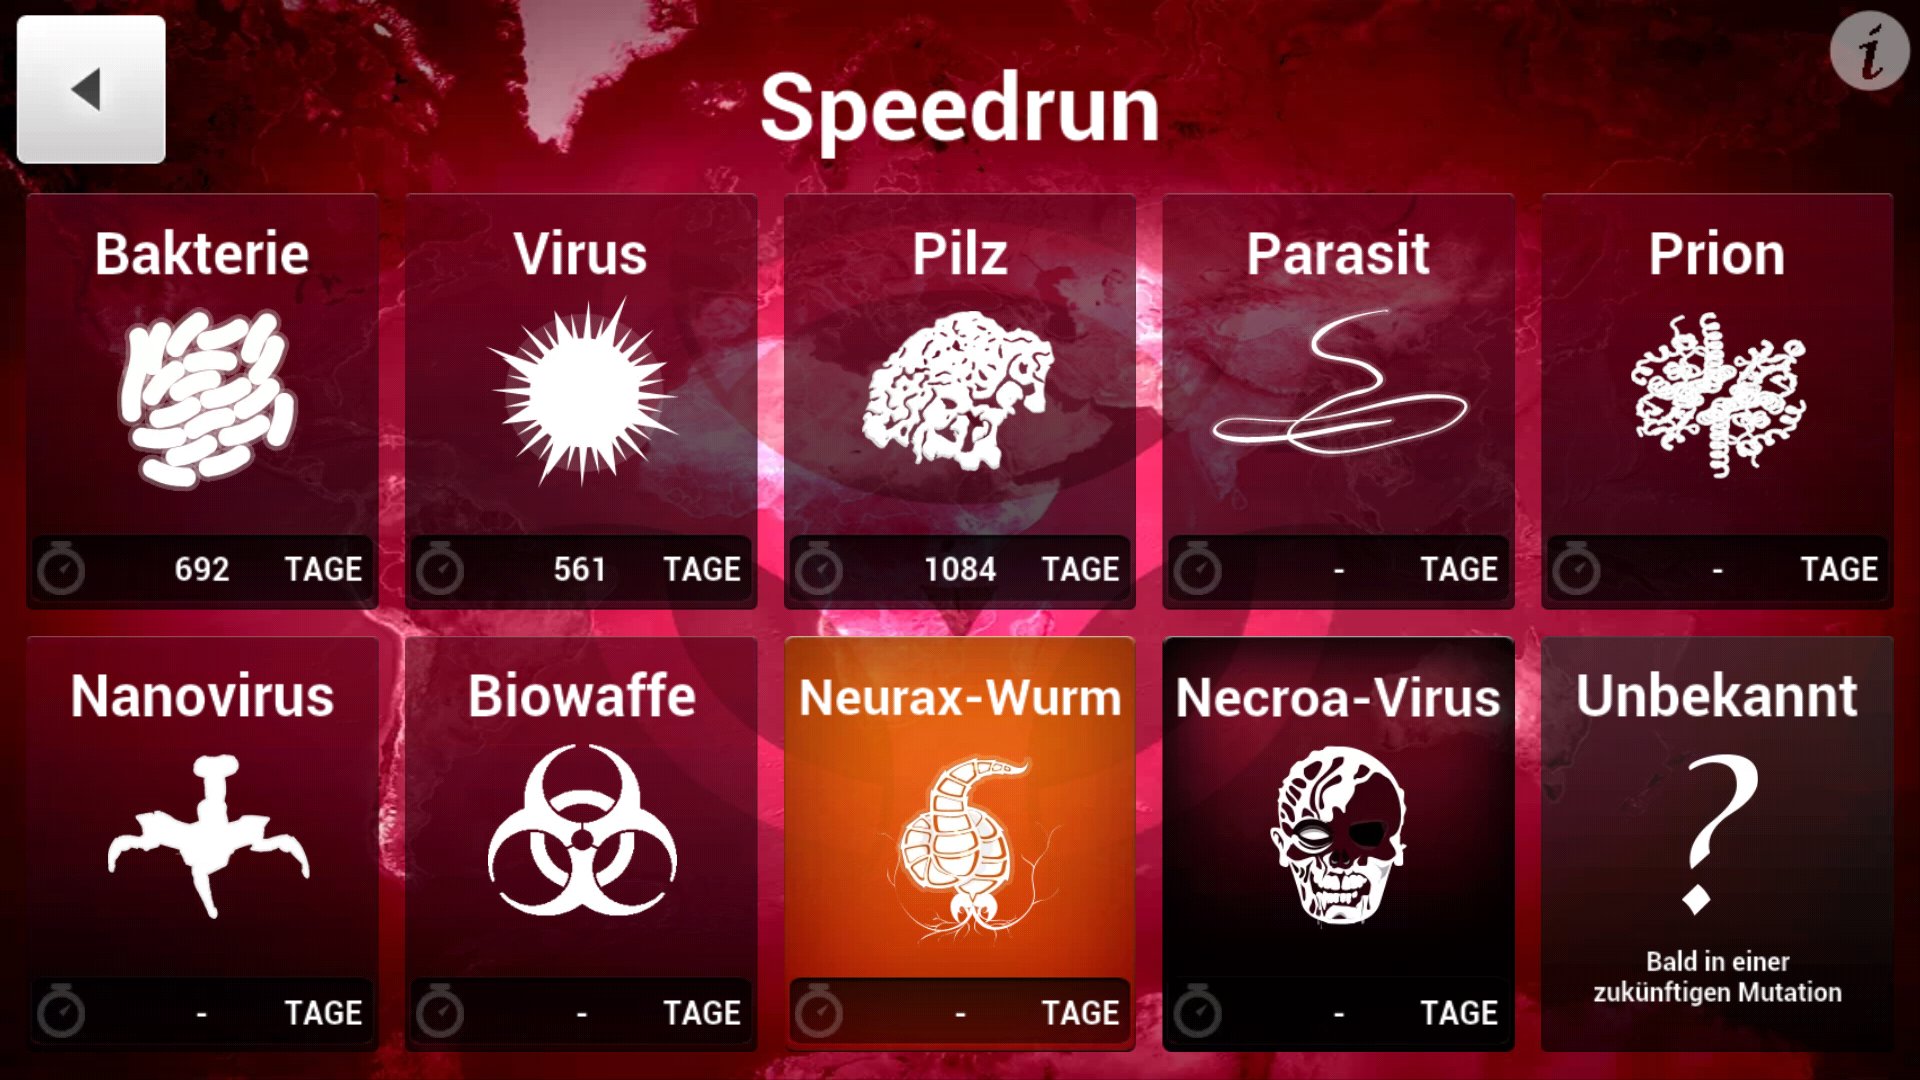 Plague Inc Difference Between Bacteria And Virus